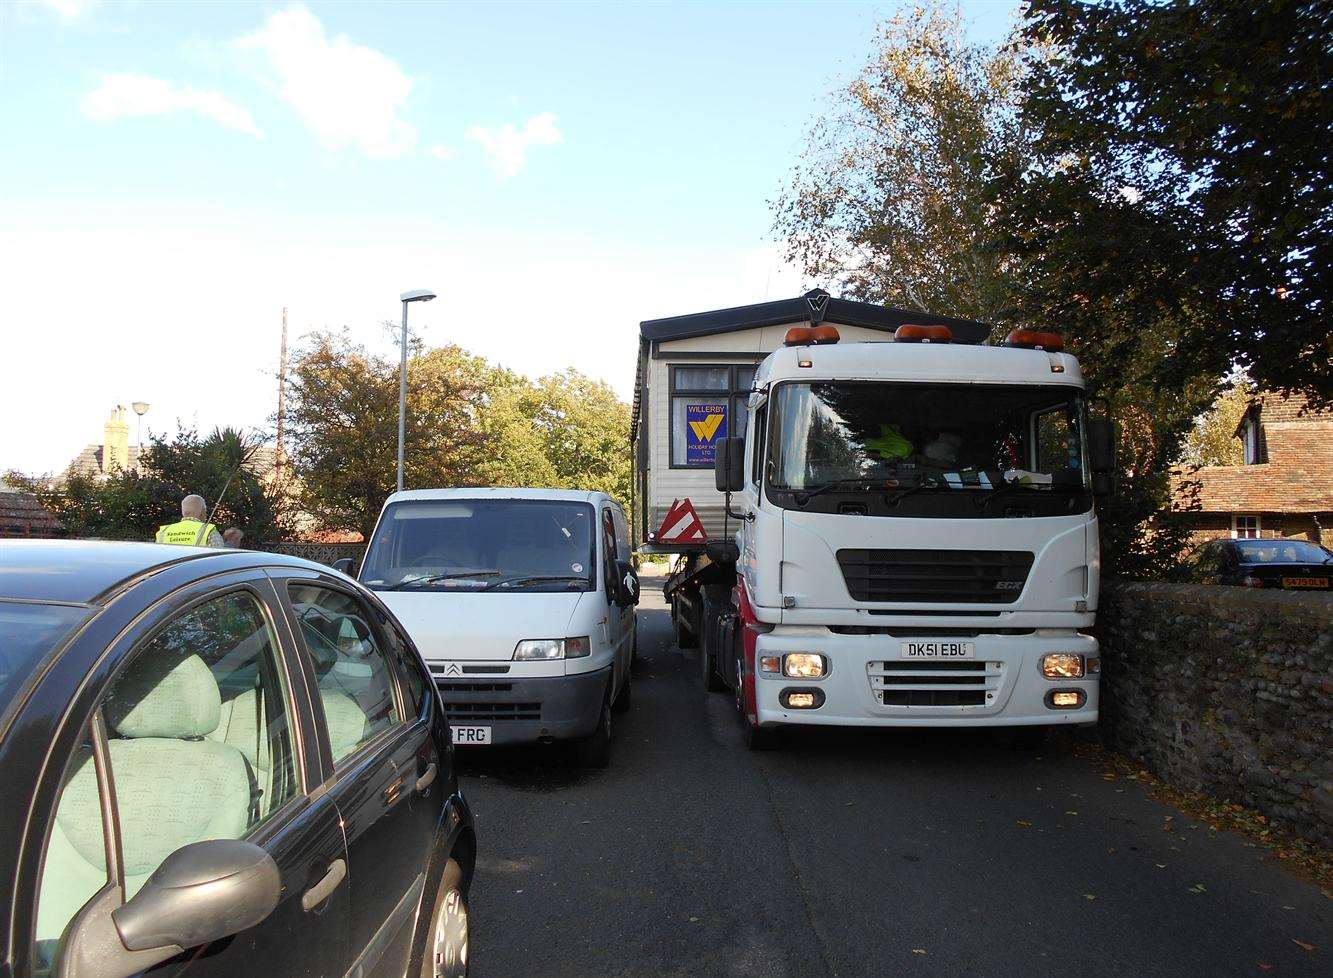 Sandwich Leisure Holiday Park is struggling to make deliveries of caravans due to congestion on St Bart's Road